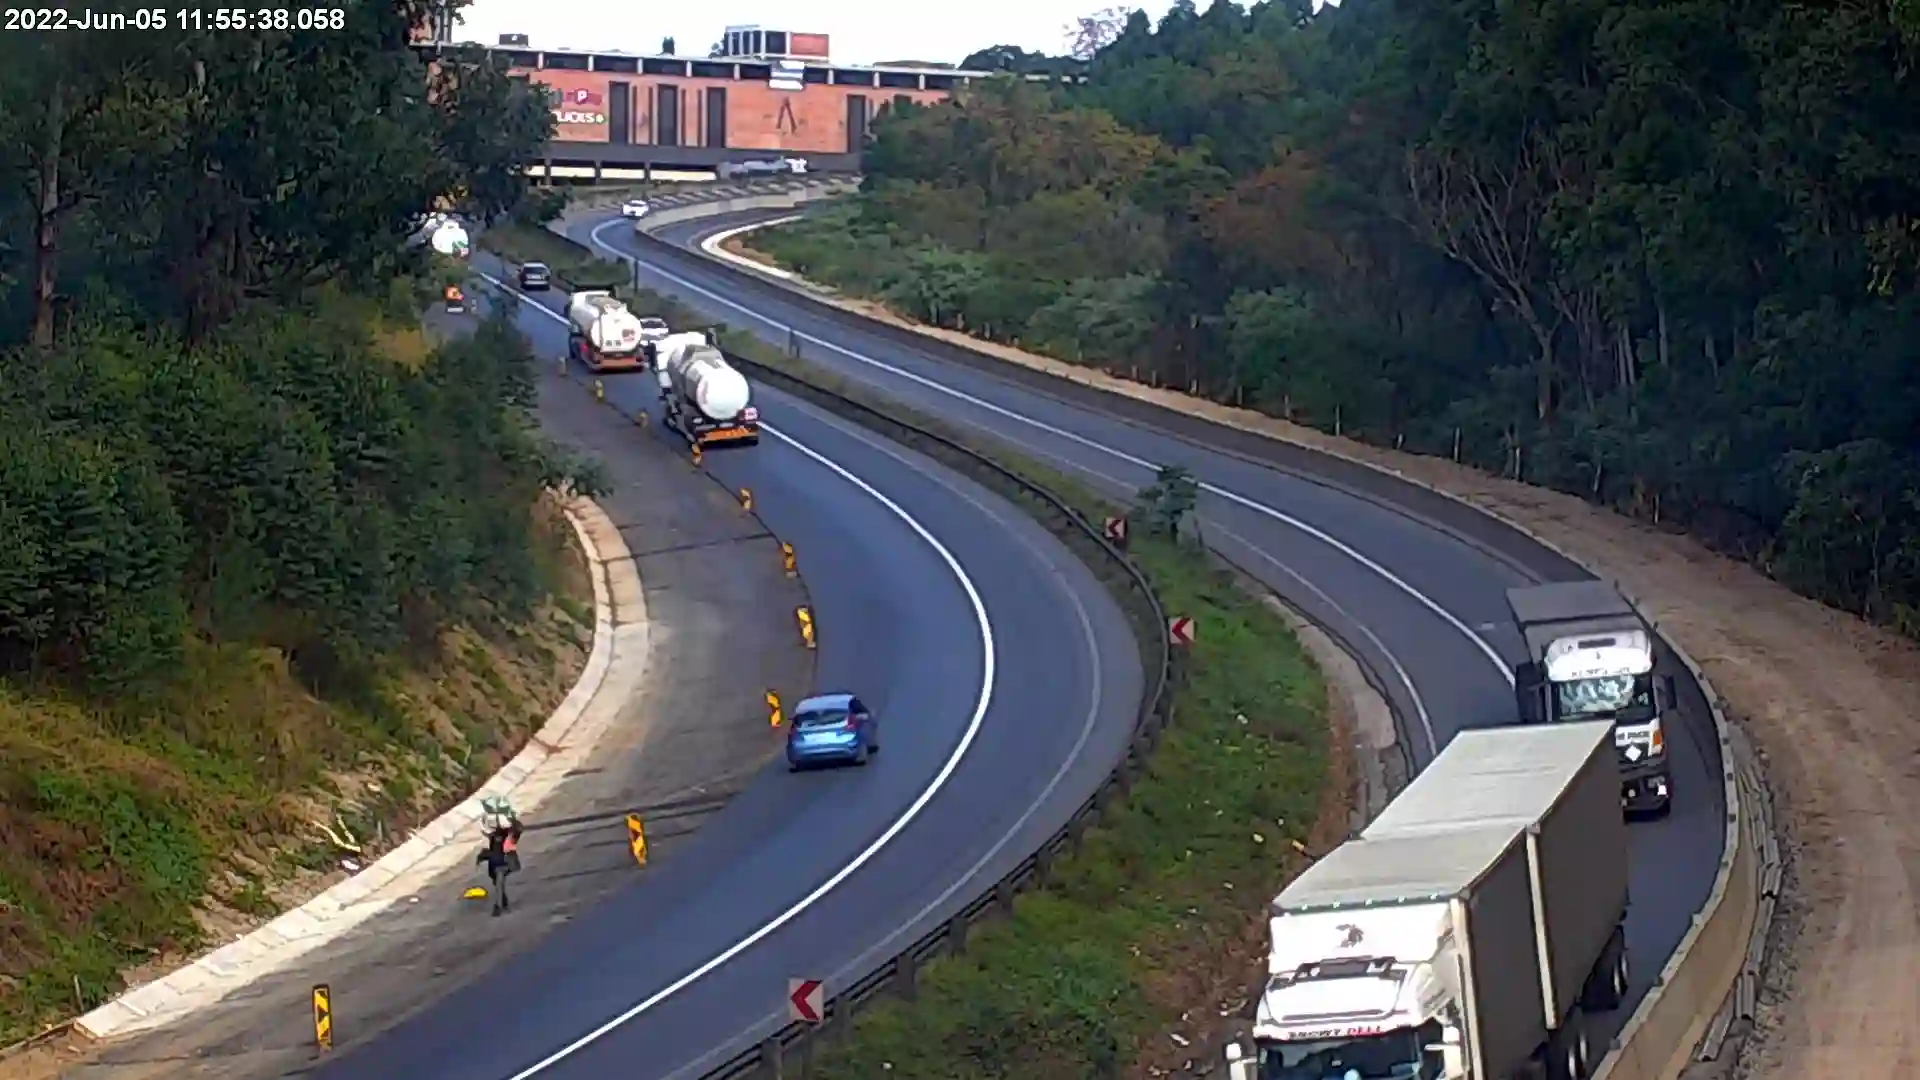 N3 construction zones become death traps, drivers need to change, writes a concerned trucker